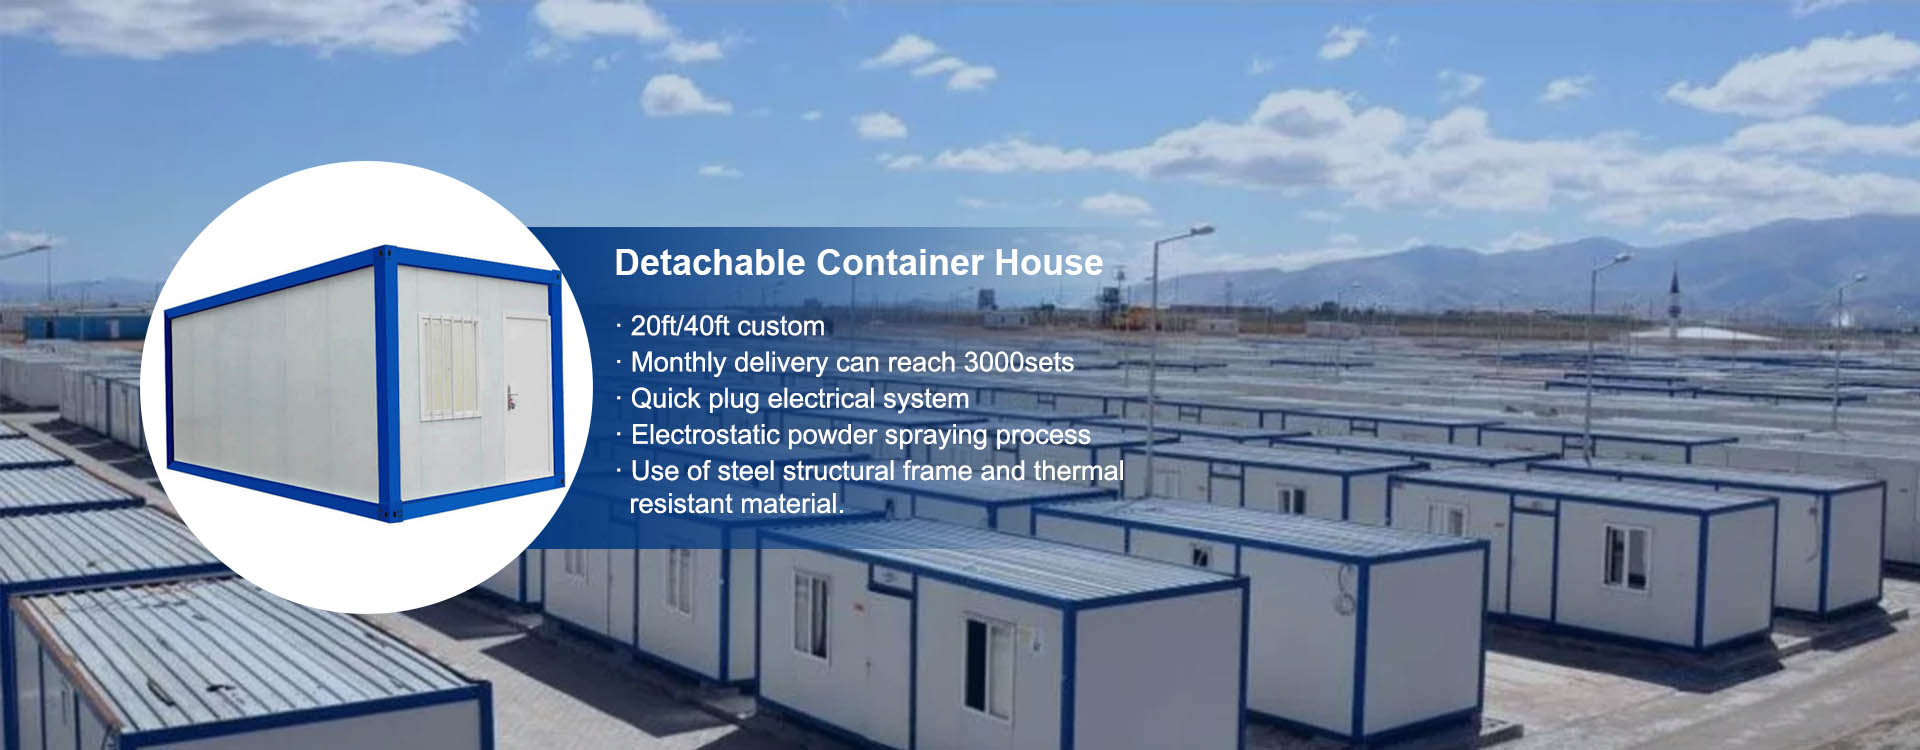 Detachable Container House Professional Manufacturer - WOODENOX